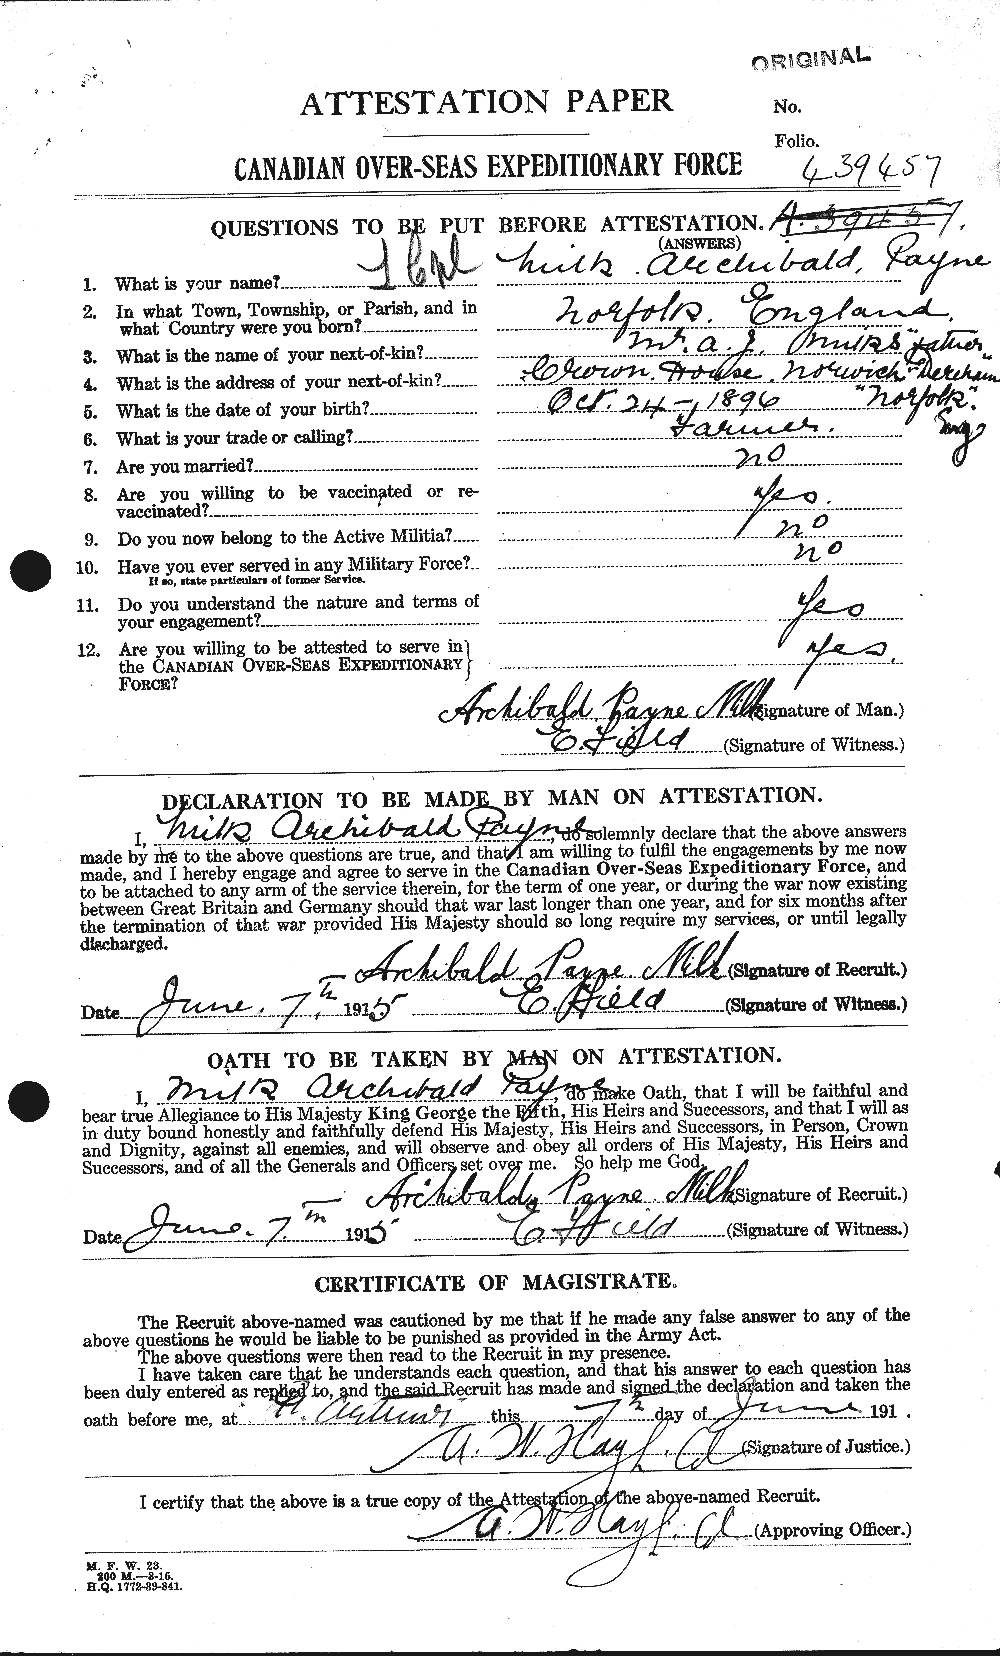 Personnel Records of the First World War - CEF 495148a